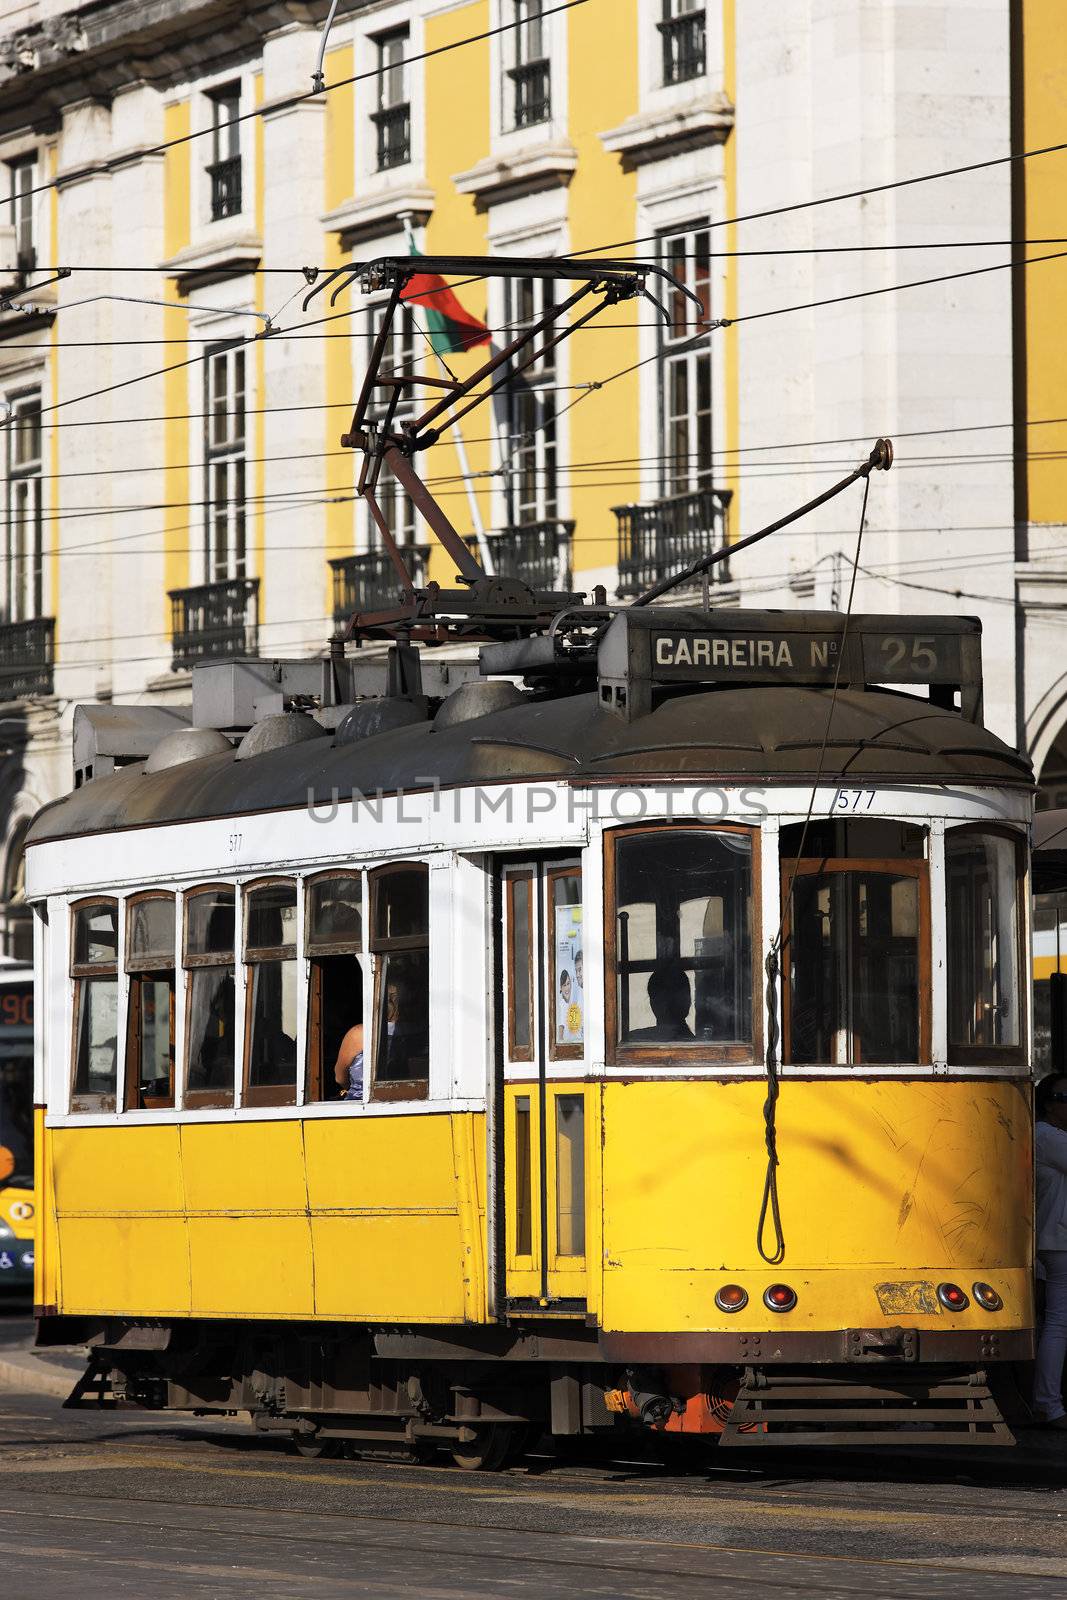 Typical Tram in Lisbon by vwalakte